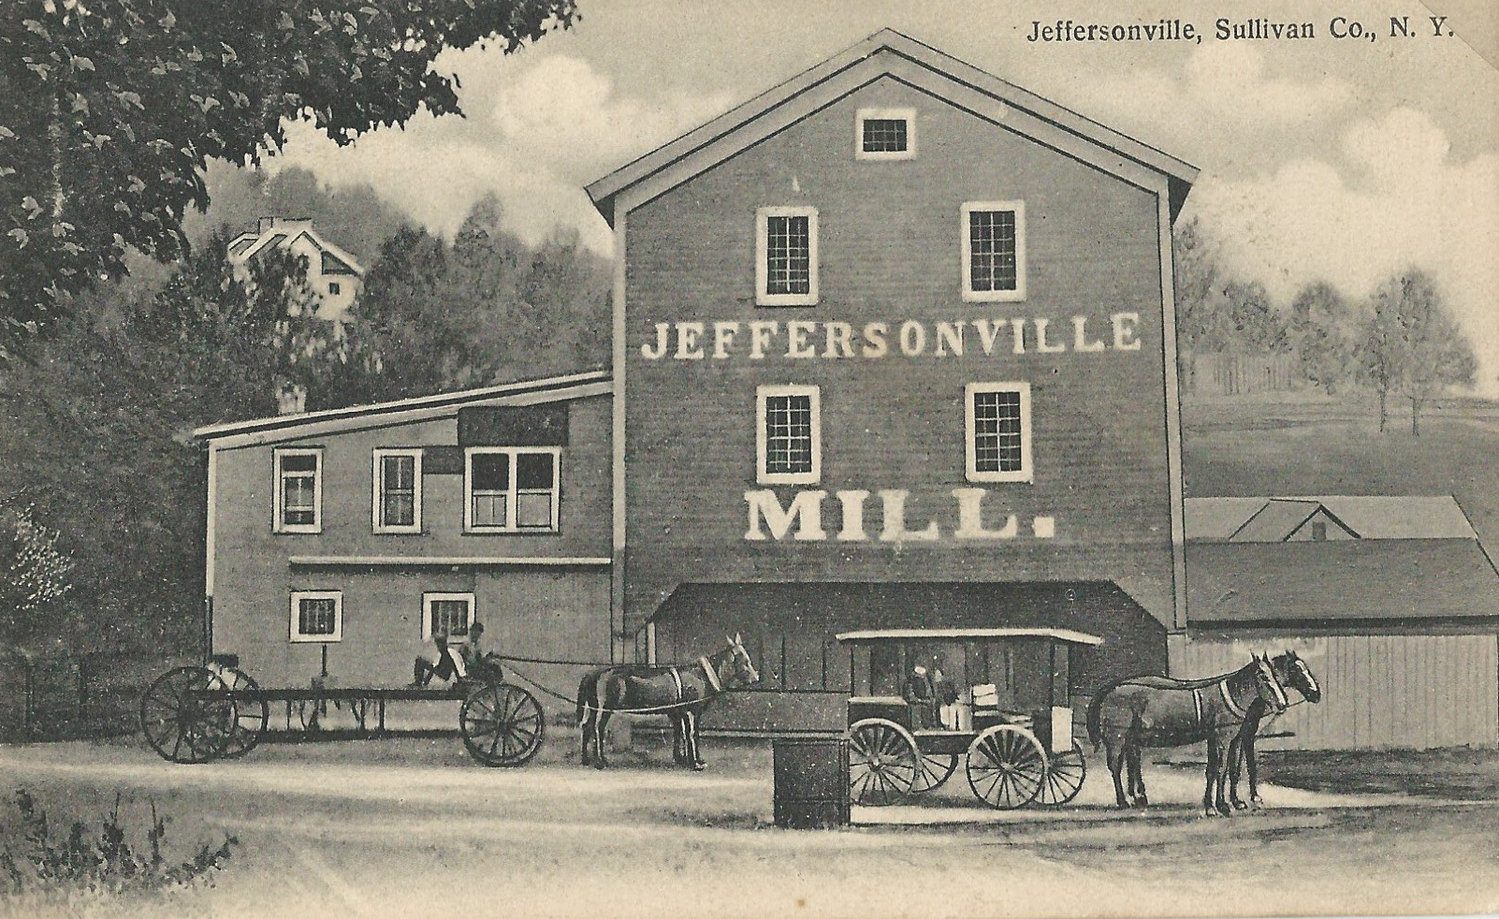 Mill fire loss exceeded $12,000: 

The Jeffersonville Mill was destroyed by fire in 1912, stilling the operation of a business that had been owned by William Bollenbach for 16 years. While the Decades item of 110 years ago states that a man named Seibert had built the mill which burned, Callicoon historian Charles S. Hick later wrote in the Sullivan County Record that there were two mills operating in the late 1860s in Jeffersonville. Henry Seibert’s mill was passed on to Fred Scheidell, and it was demolished sometime before 1942. The report in 1912 indicated that this mill was owned by Sheriff Tuttle and Rudolph Bury initially. The mill had its longest, most successful run under Mr. Bollenbach, who learned milling from his father in Germany. This image is from the postcard collection at the Sullivan County Historical Society in Hurleyville. For information call (845) 434-8044 or email info@scnyhistory.org.